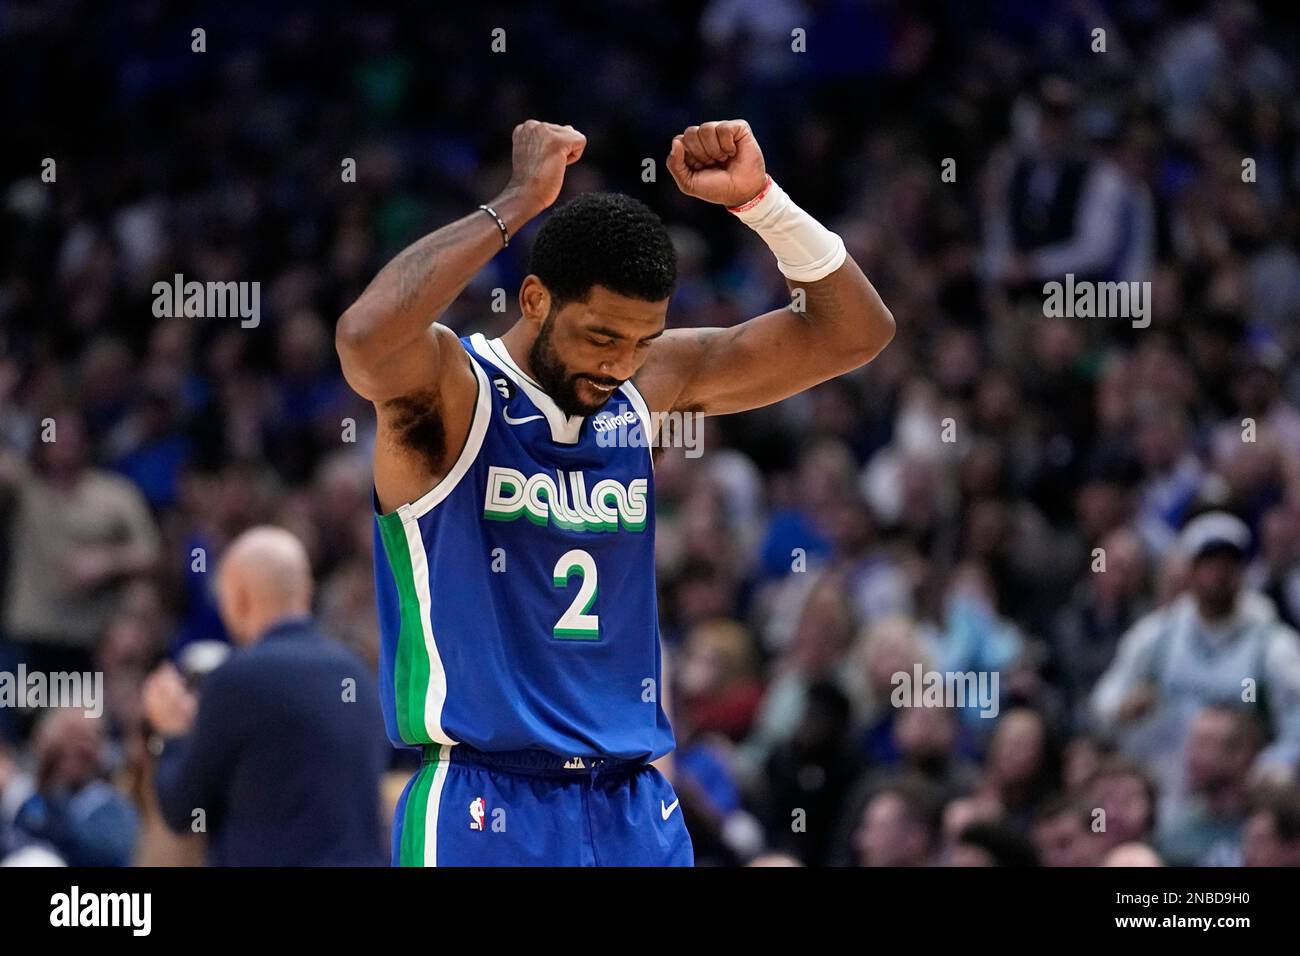 Los Angeles, United States. 17th Mar, 2023. Dallas Mavericks forward Maxi  Kleber celebrates after making a winning 3-pointer against the Los Angeles  Lakers during an NBA basketball game at Crypto.com Arena in